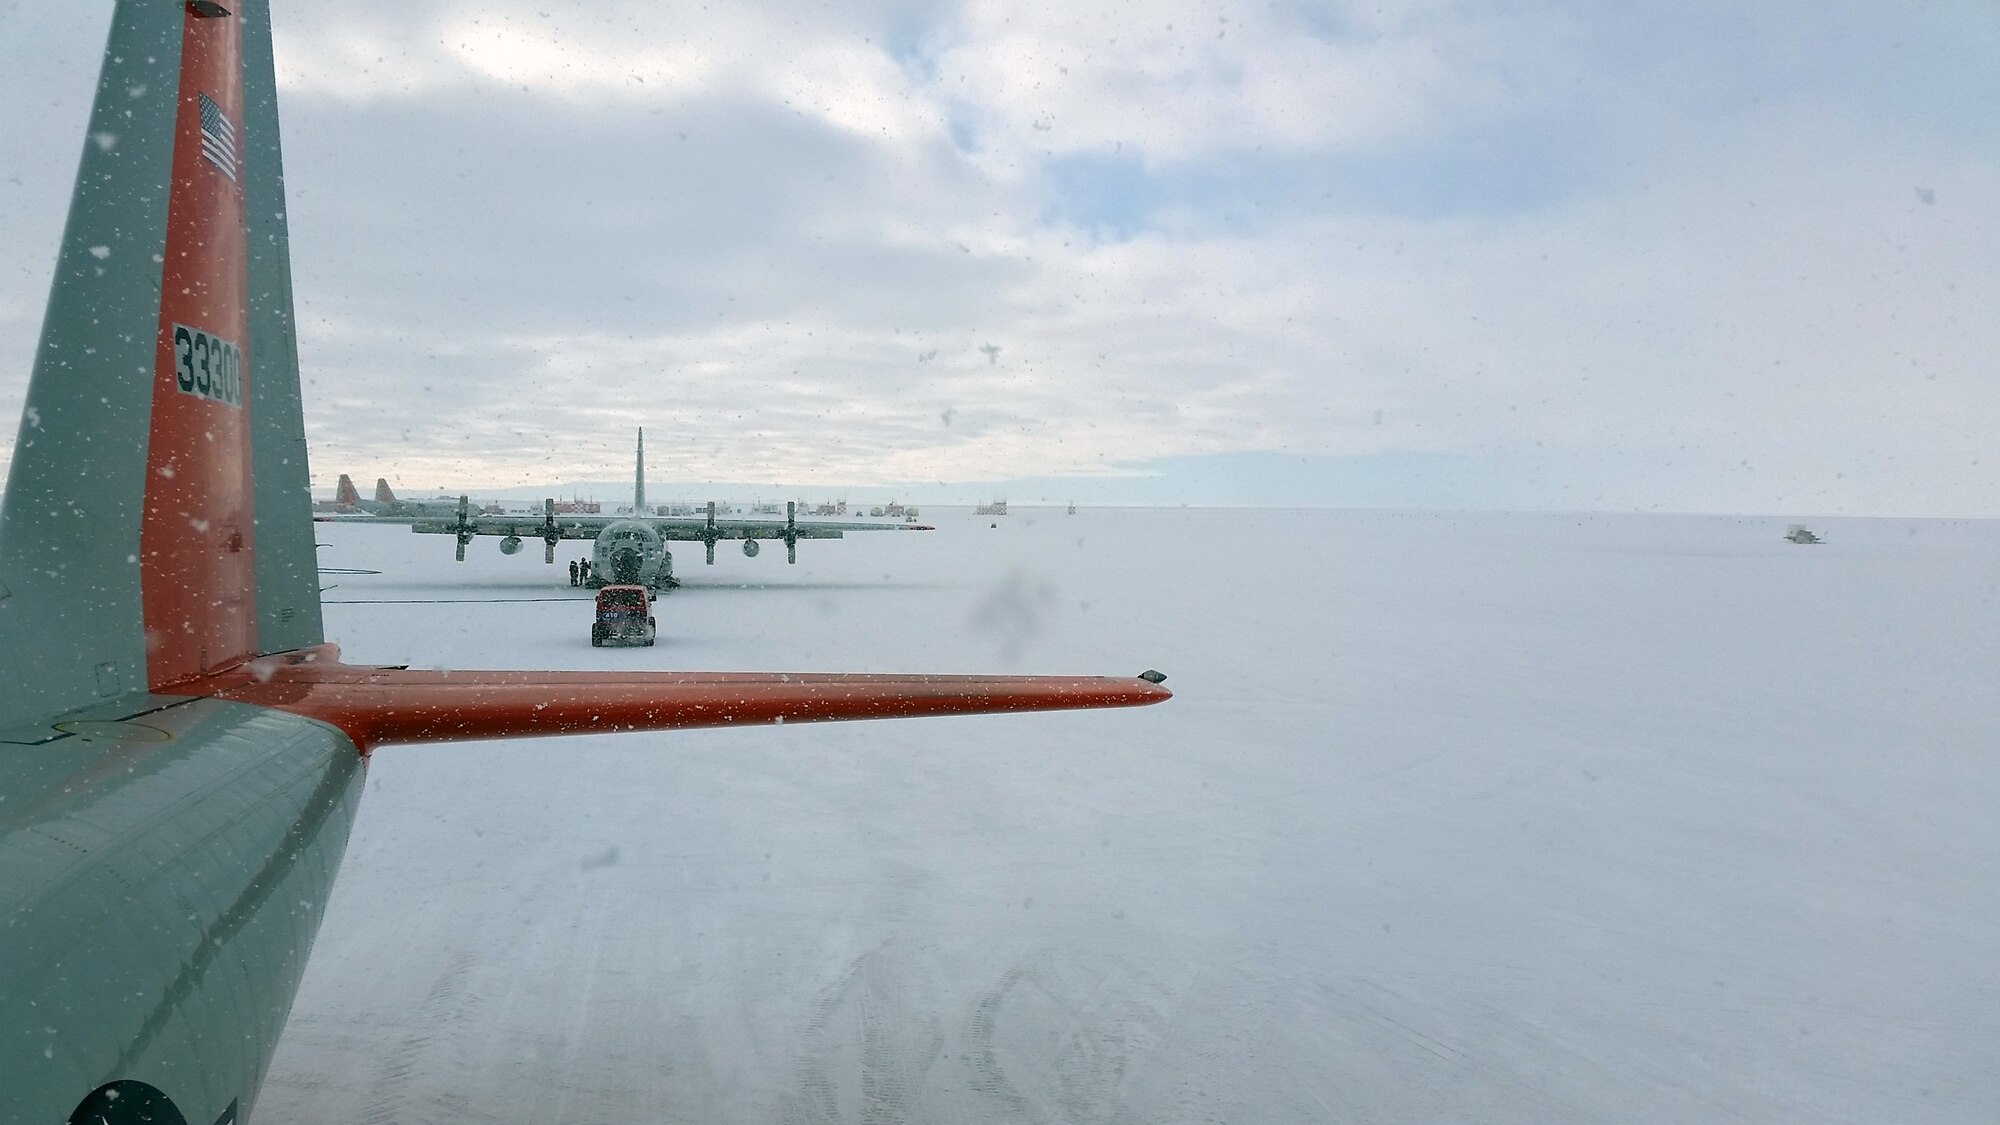 A C-130 Hercules aircraft sits at McMurdo Station, Antarctica, during a snow storm Nov. 13, 2014. Senior Airman Lucas McEntire, an aircraft fuels systems mechanic with the 103rd Mainte-nance Squadron, said he took the photo from on top of one of the C-130 aircraft that he was working on. (U.S. Air National Guard photo courtesy of Senior Airman Lucas McEntire)